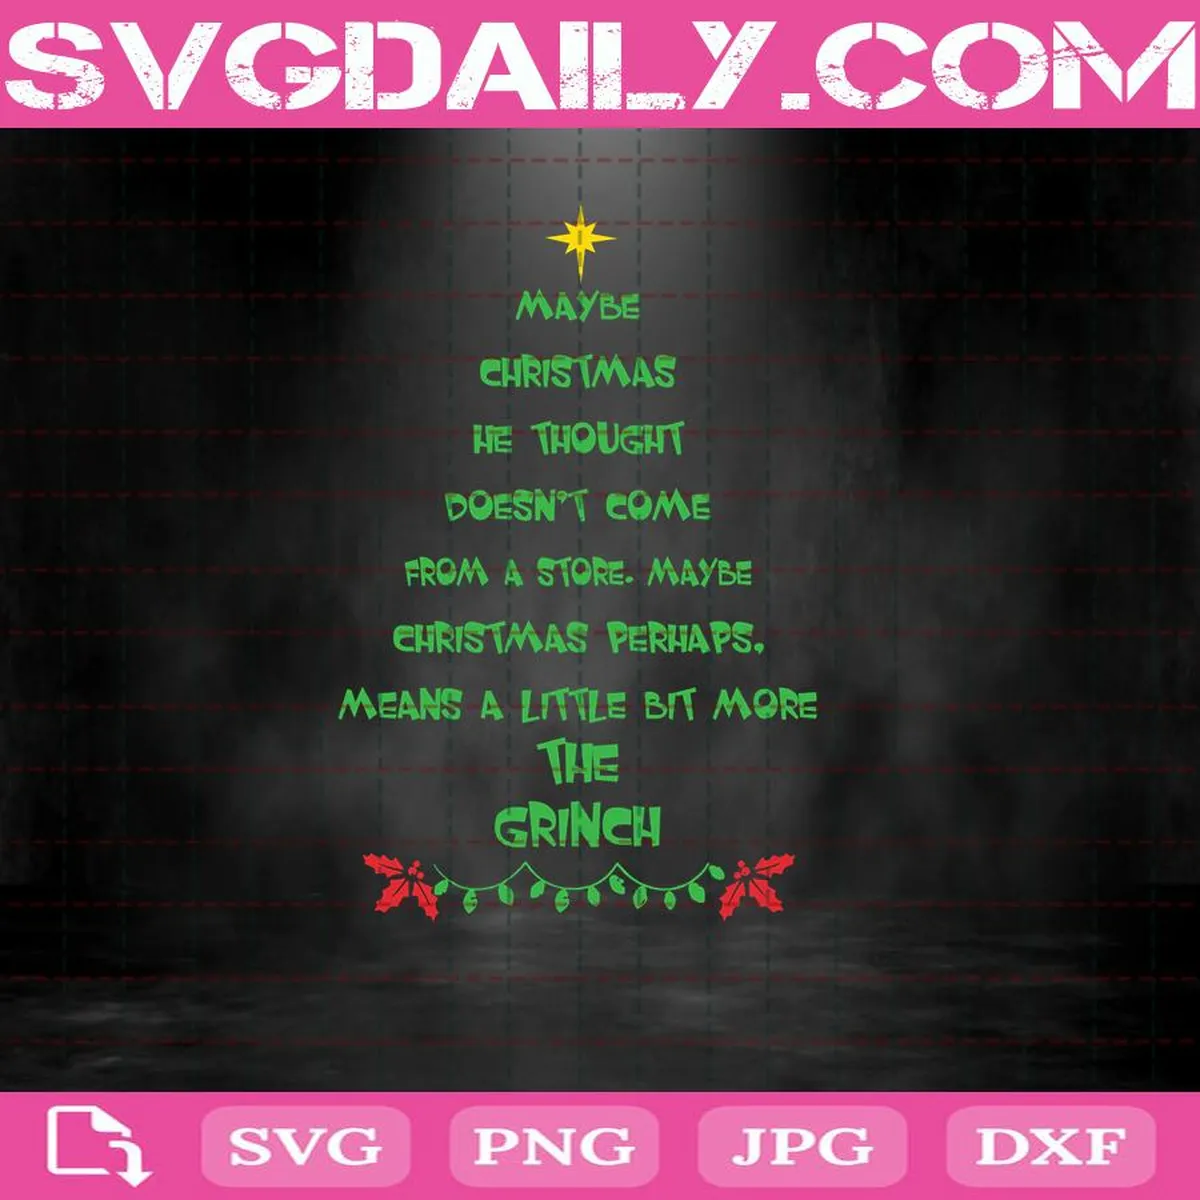 Maybe Christmas He Thought Doesn't Come From A Store. Maybe Christmas Perhaps Means A Little Bit More Svg, Christmas Tree Svg, The Grinch Svg